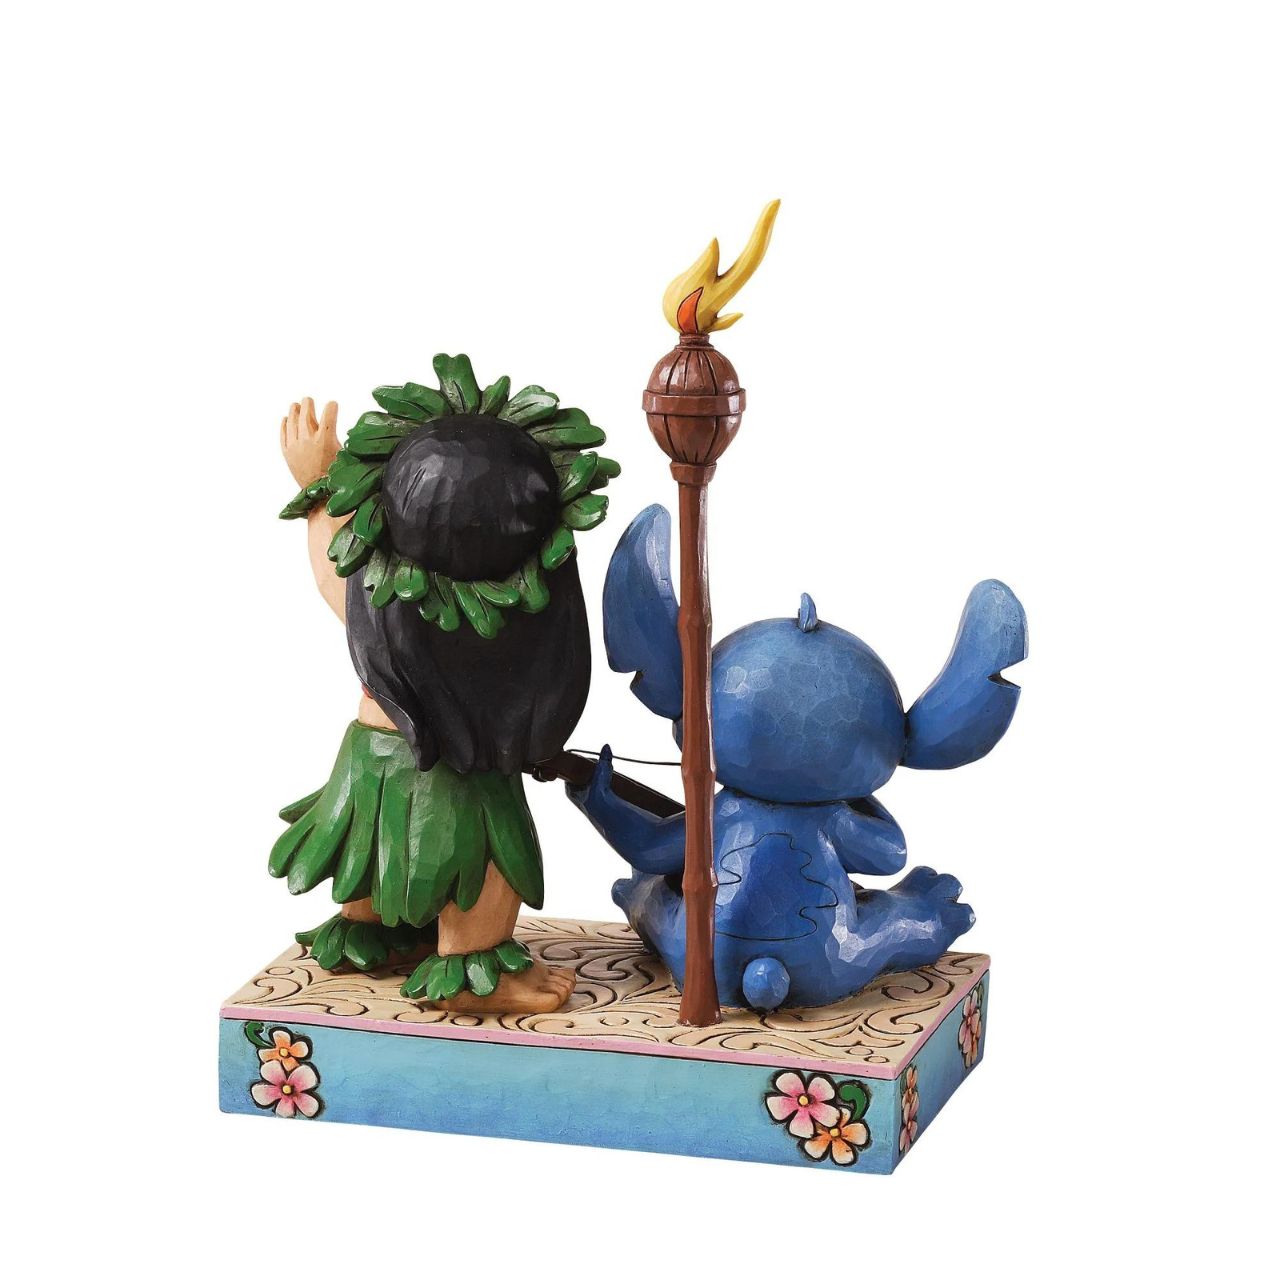 Disney Lilo and Stitch Figurine by Jim Shore  Inspired by the ending sequence of Disney's Lilo and Stitch, Jim Shore creates a beautiful memento to Ohana or Family. Stitch picks at his hawaiin guitar while lilo dances her native luau.